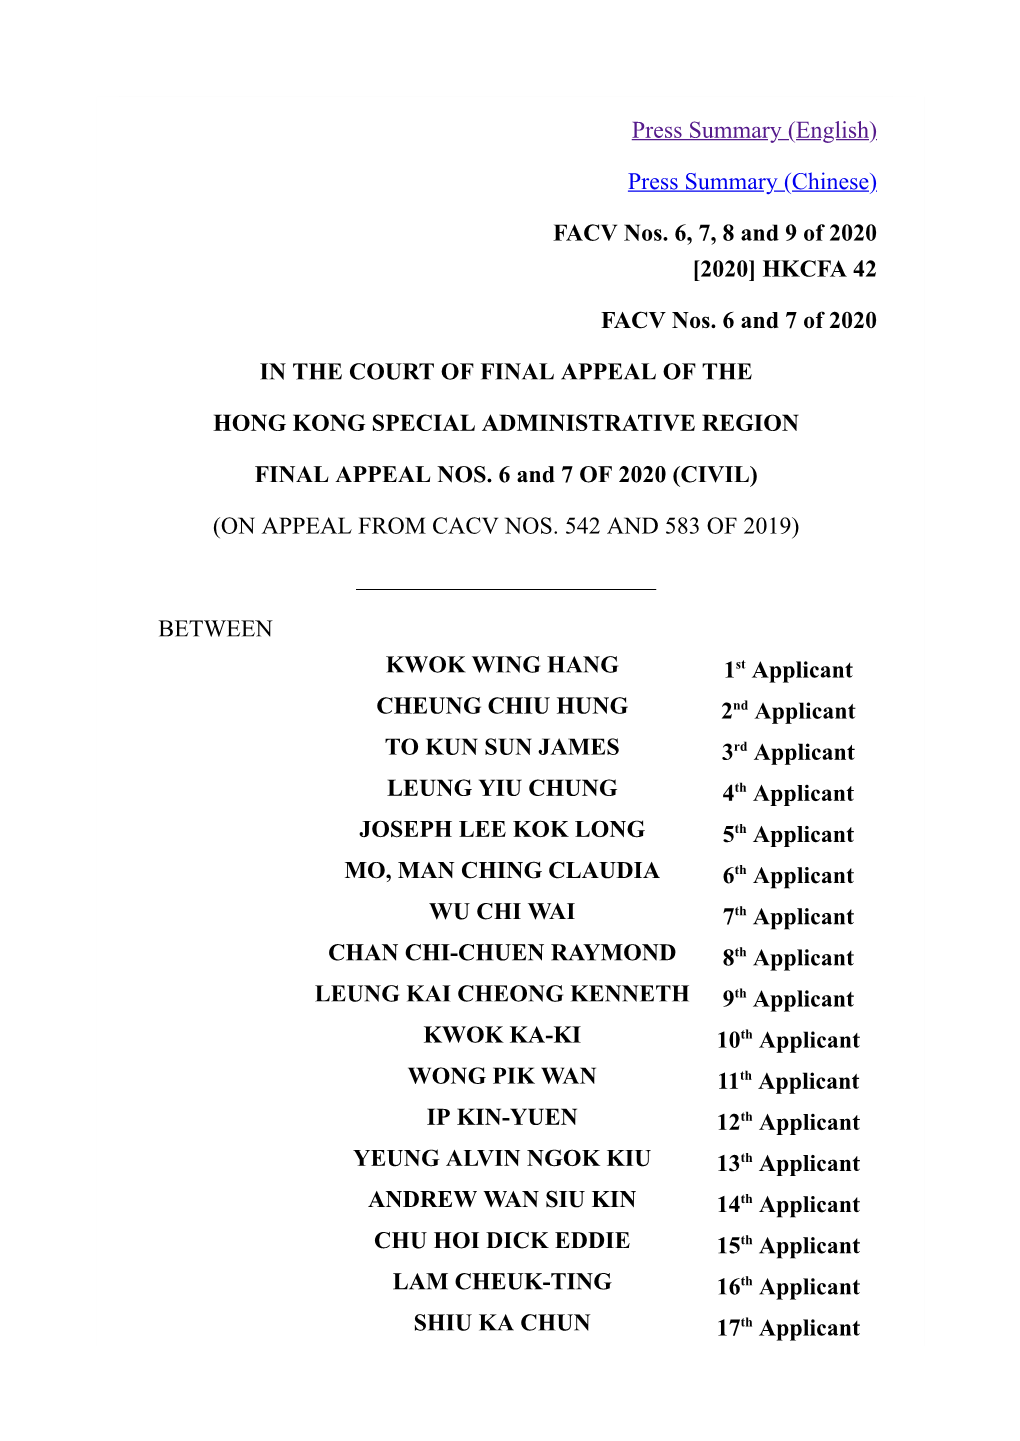 [2020] Hkcfa 42 in the Court of Final Appeal of The